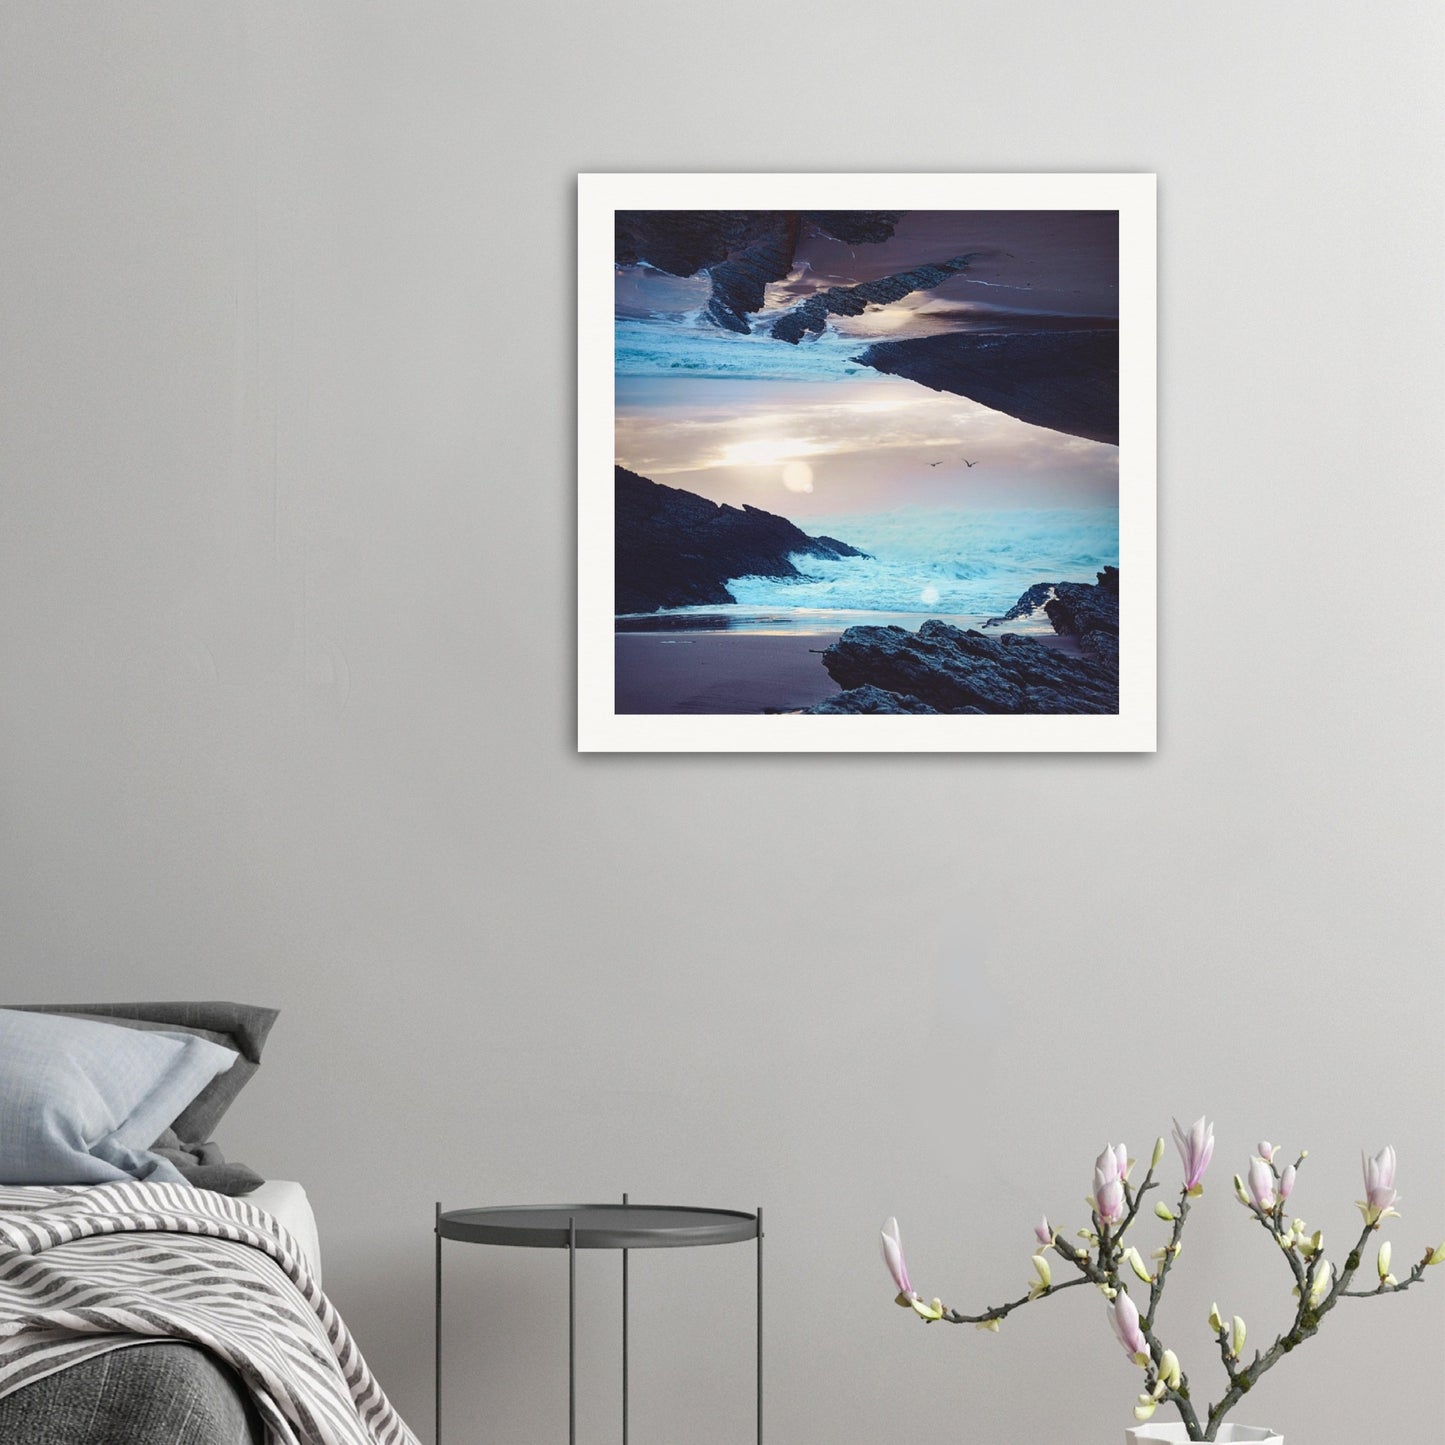 I Dreamt Of The Sea - Museum-Quality Art Print